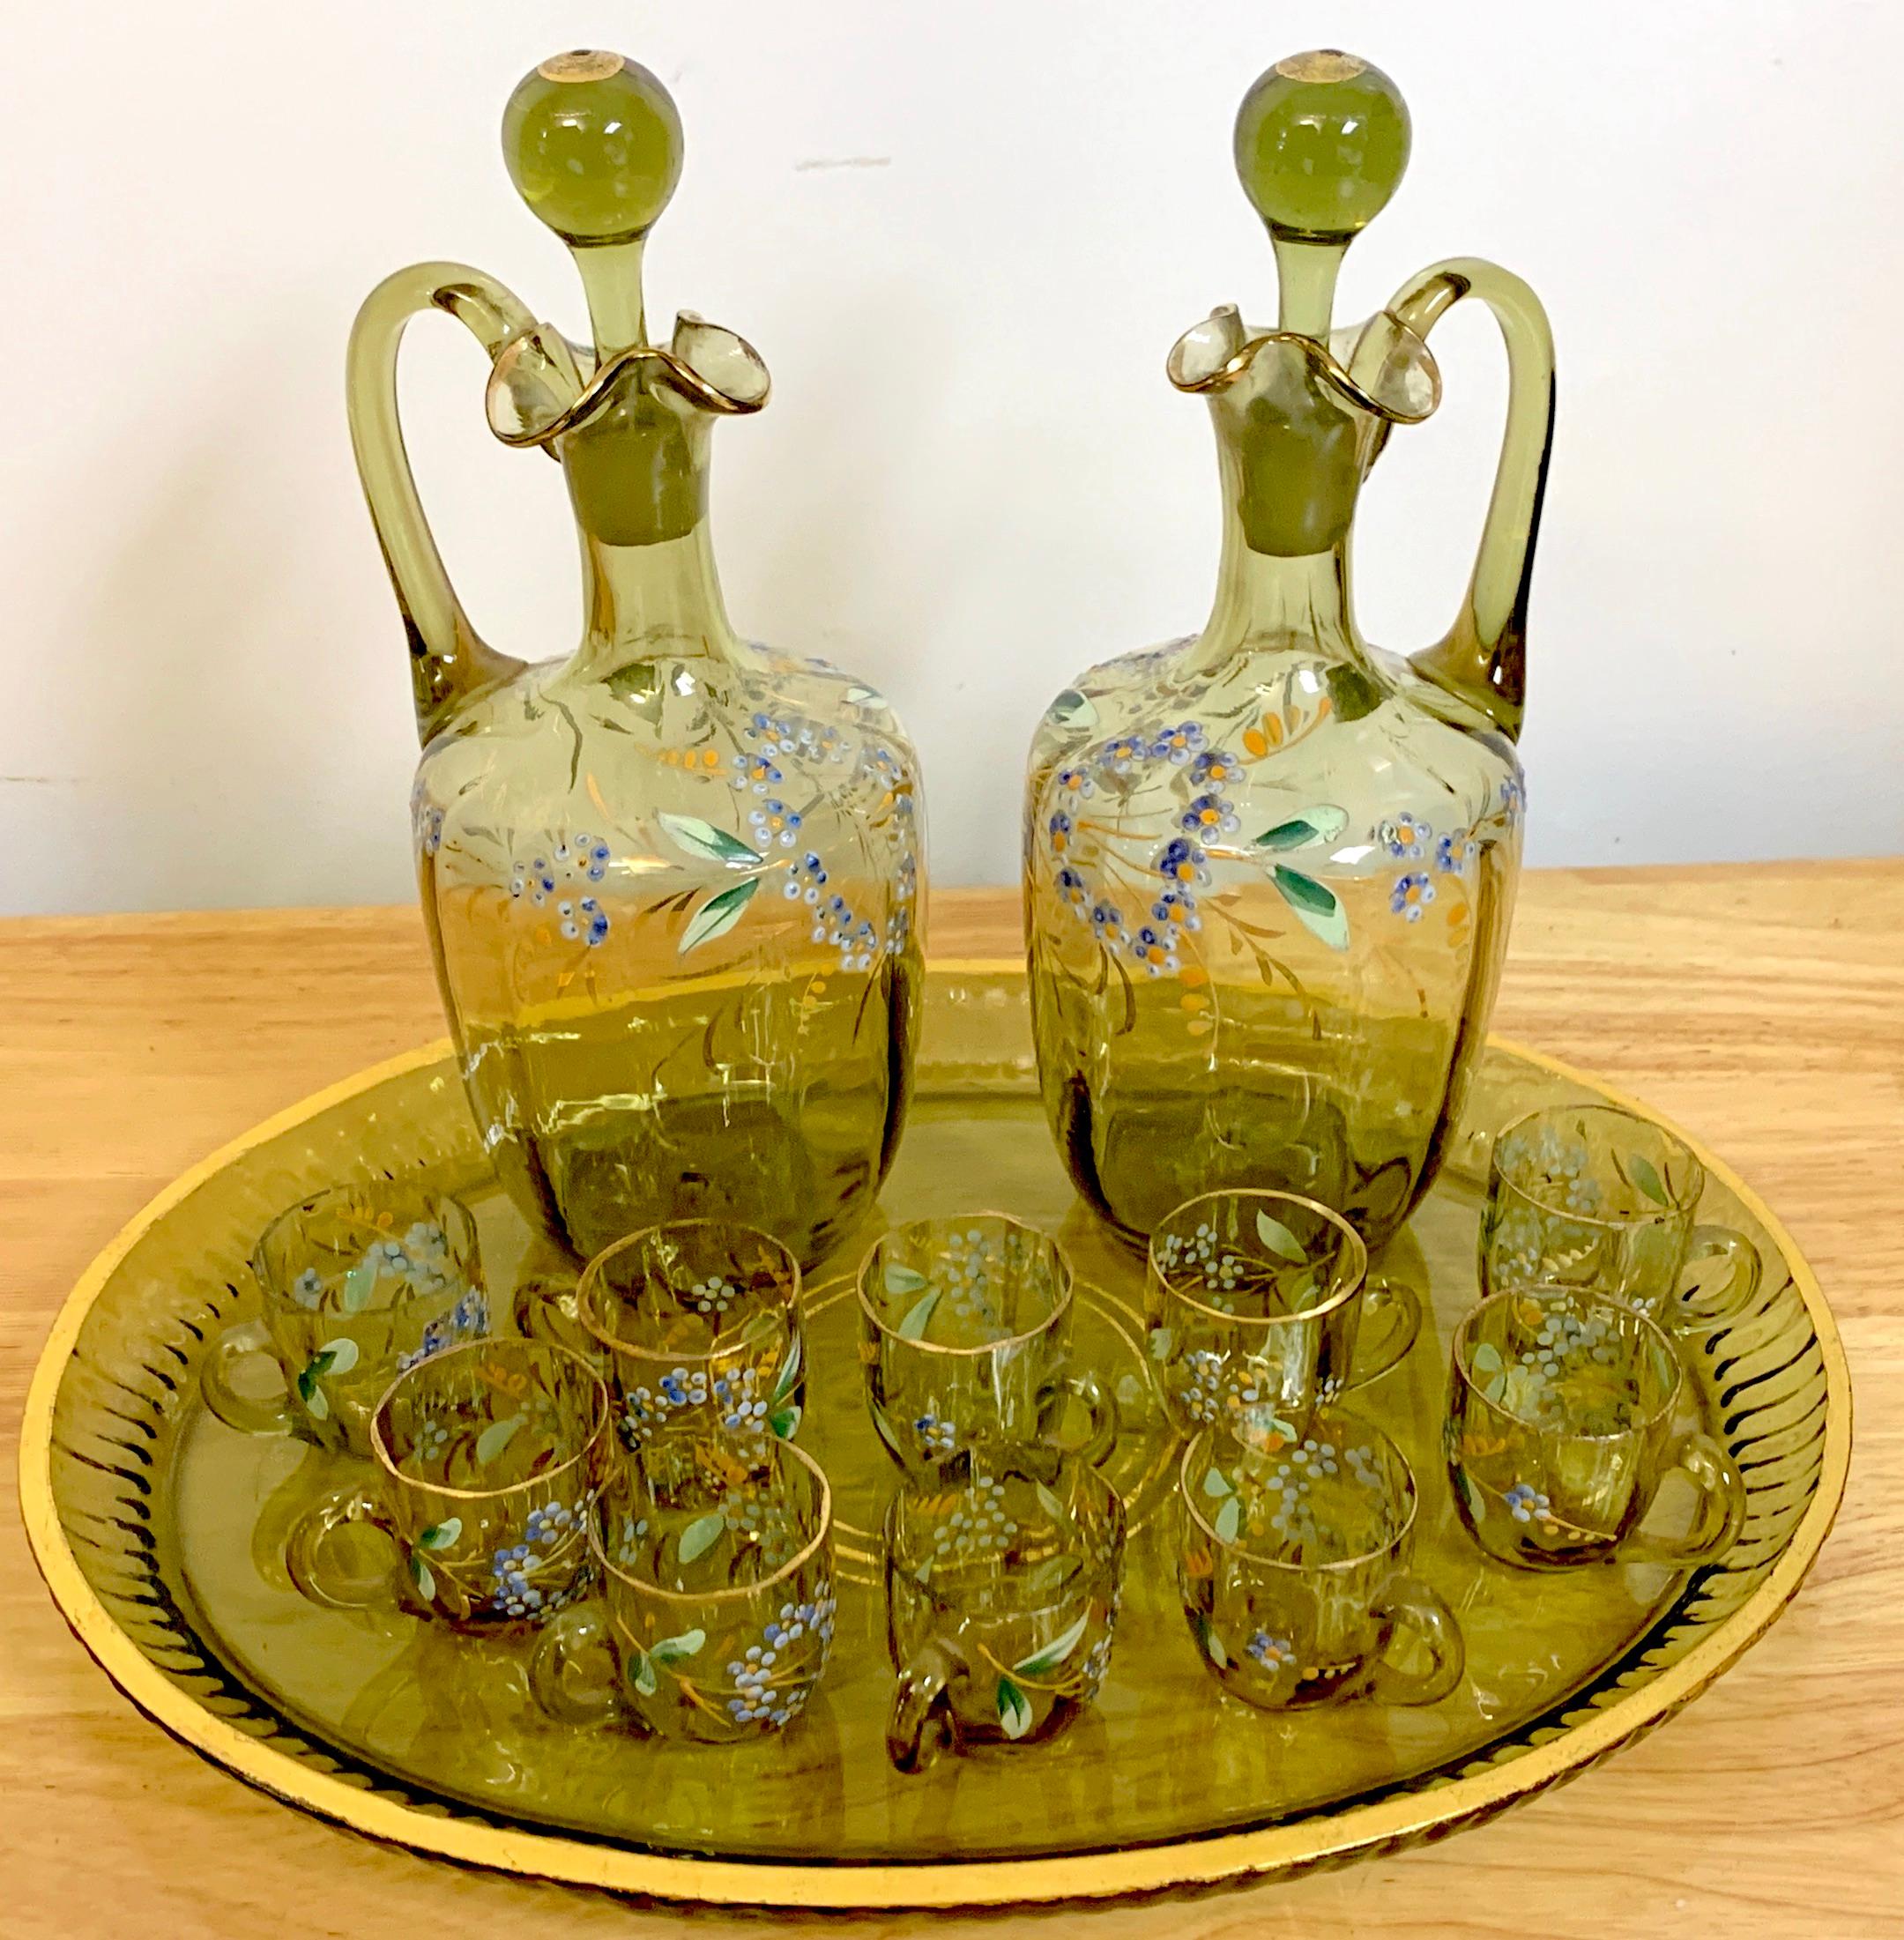 Moser Aesthetic enameled Cordial/ liquor set,15-pieces. Subtle olive green glass, with naturalistic enamel work with gilt highlights. Consisting of two handled decanters with stoppers, Ten handled cordials and one oval cut and gilt oval